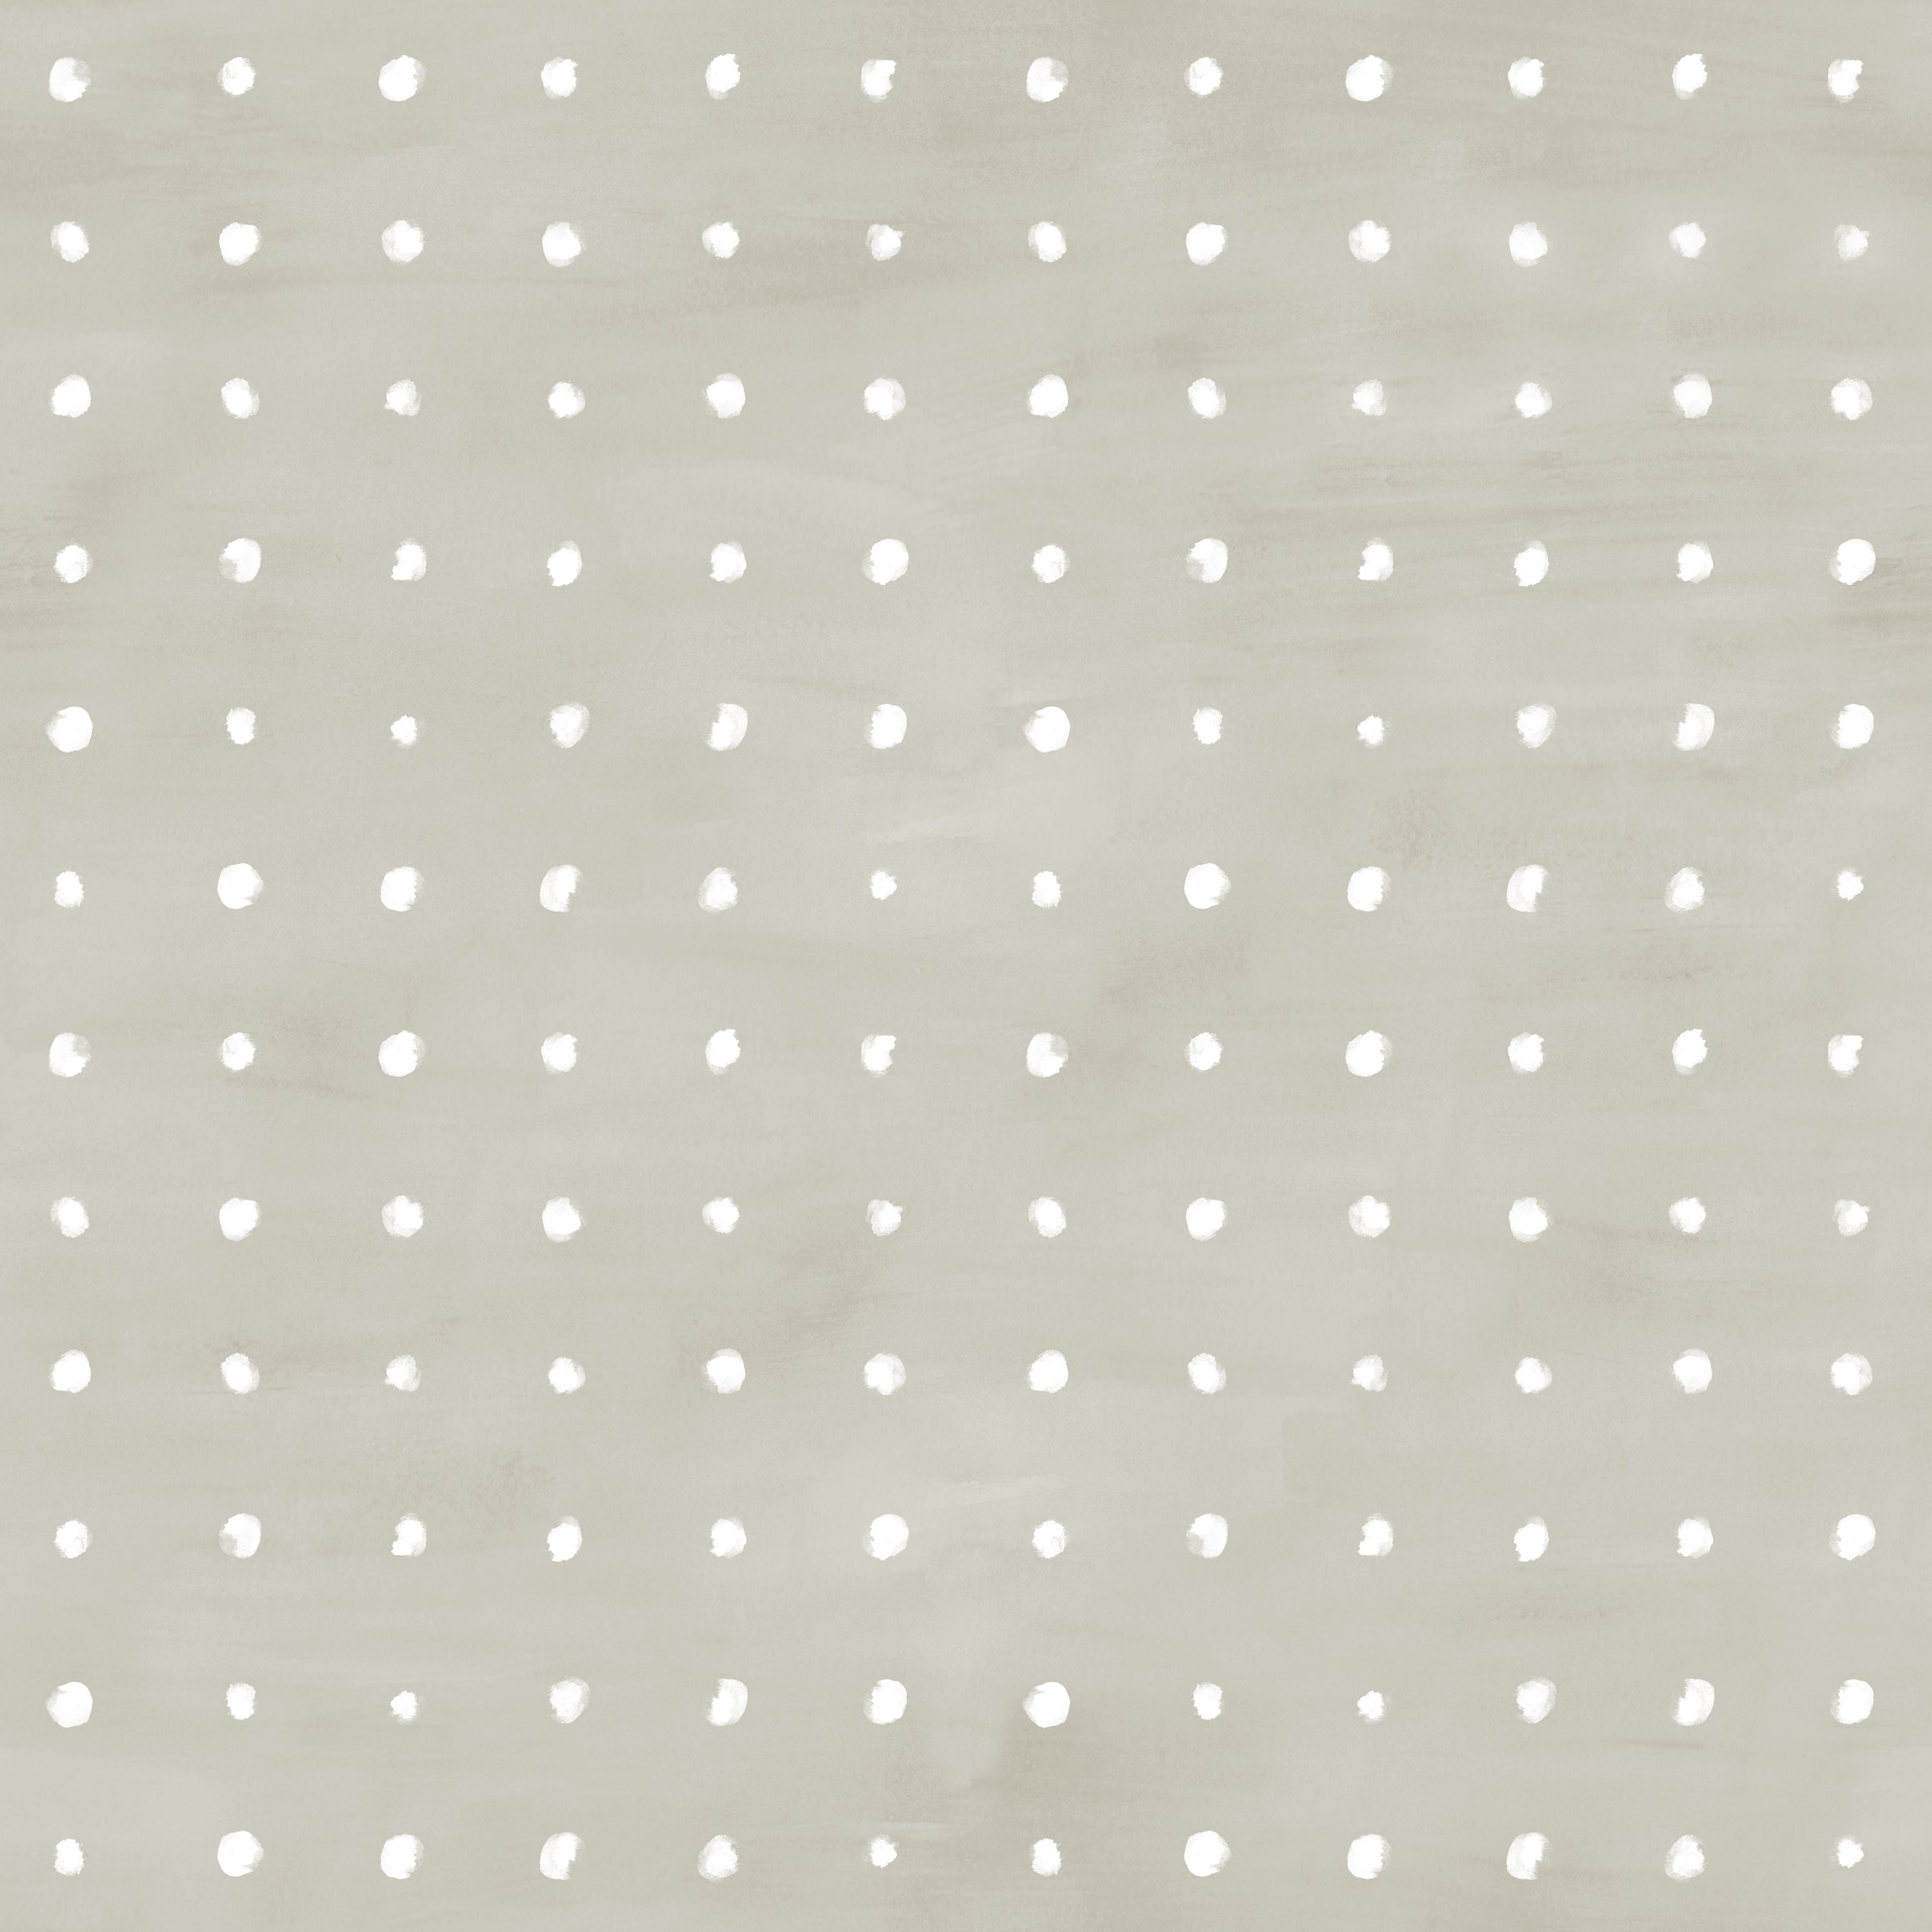 Detail of wallpaper in a dotted grid pattern in white on a light green field.